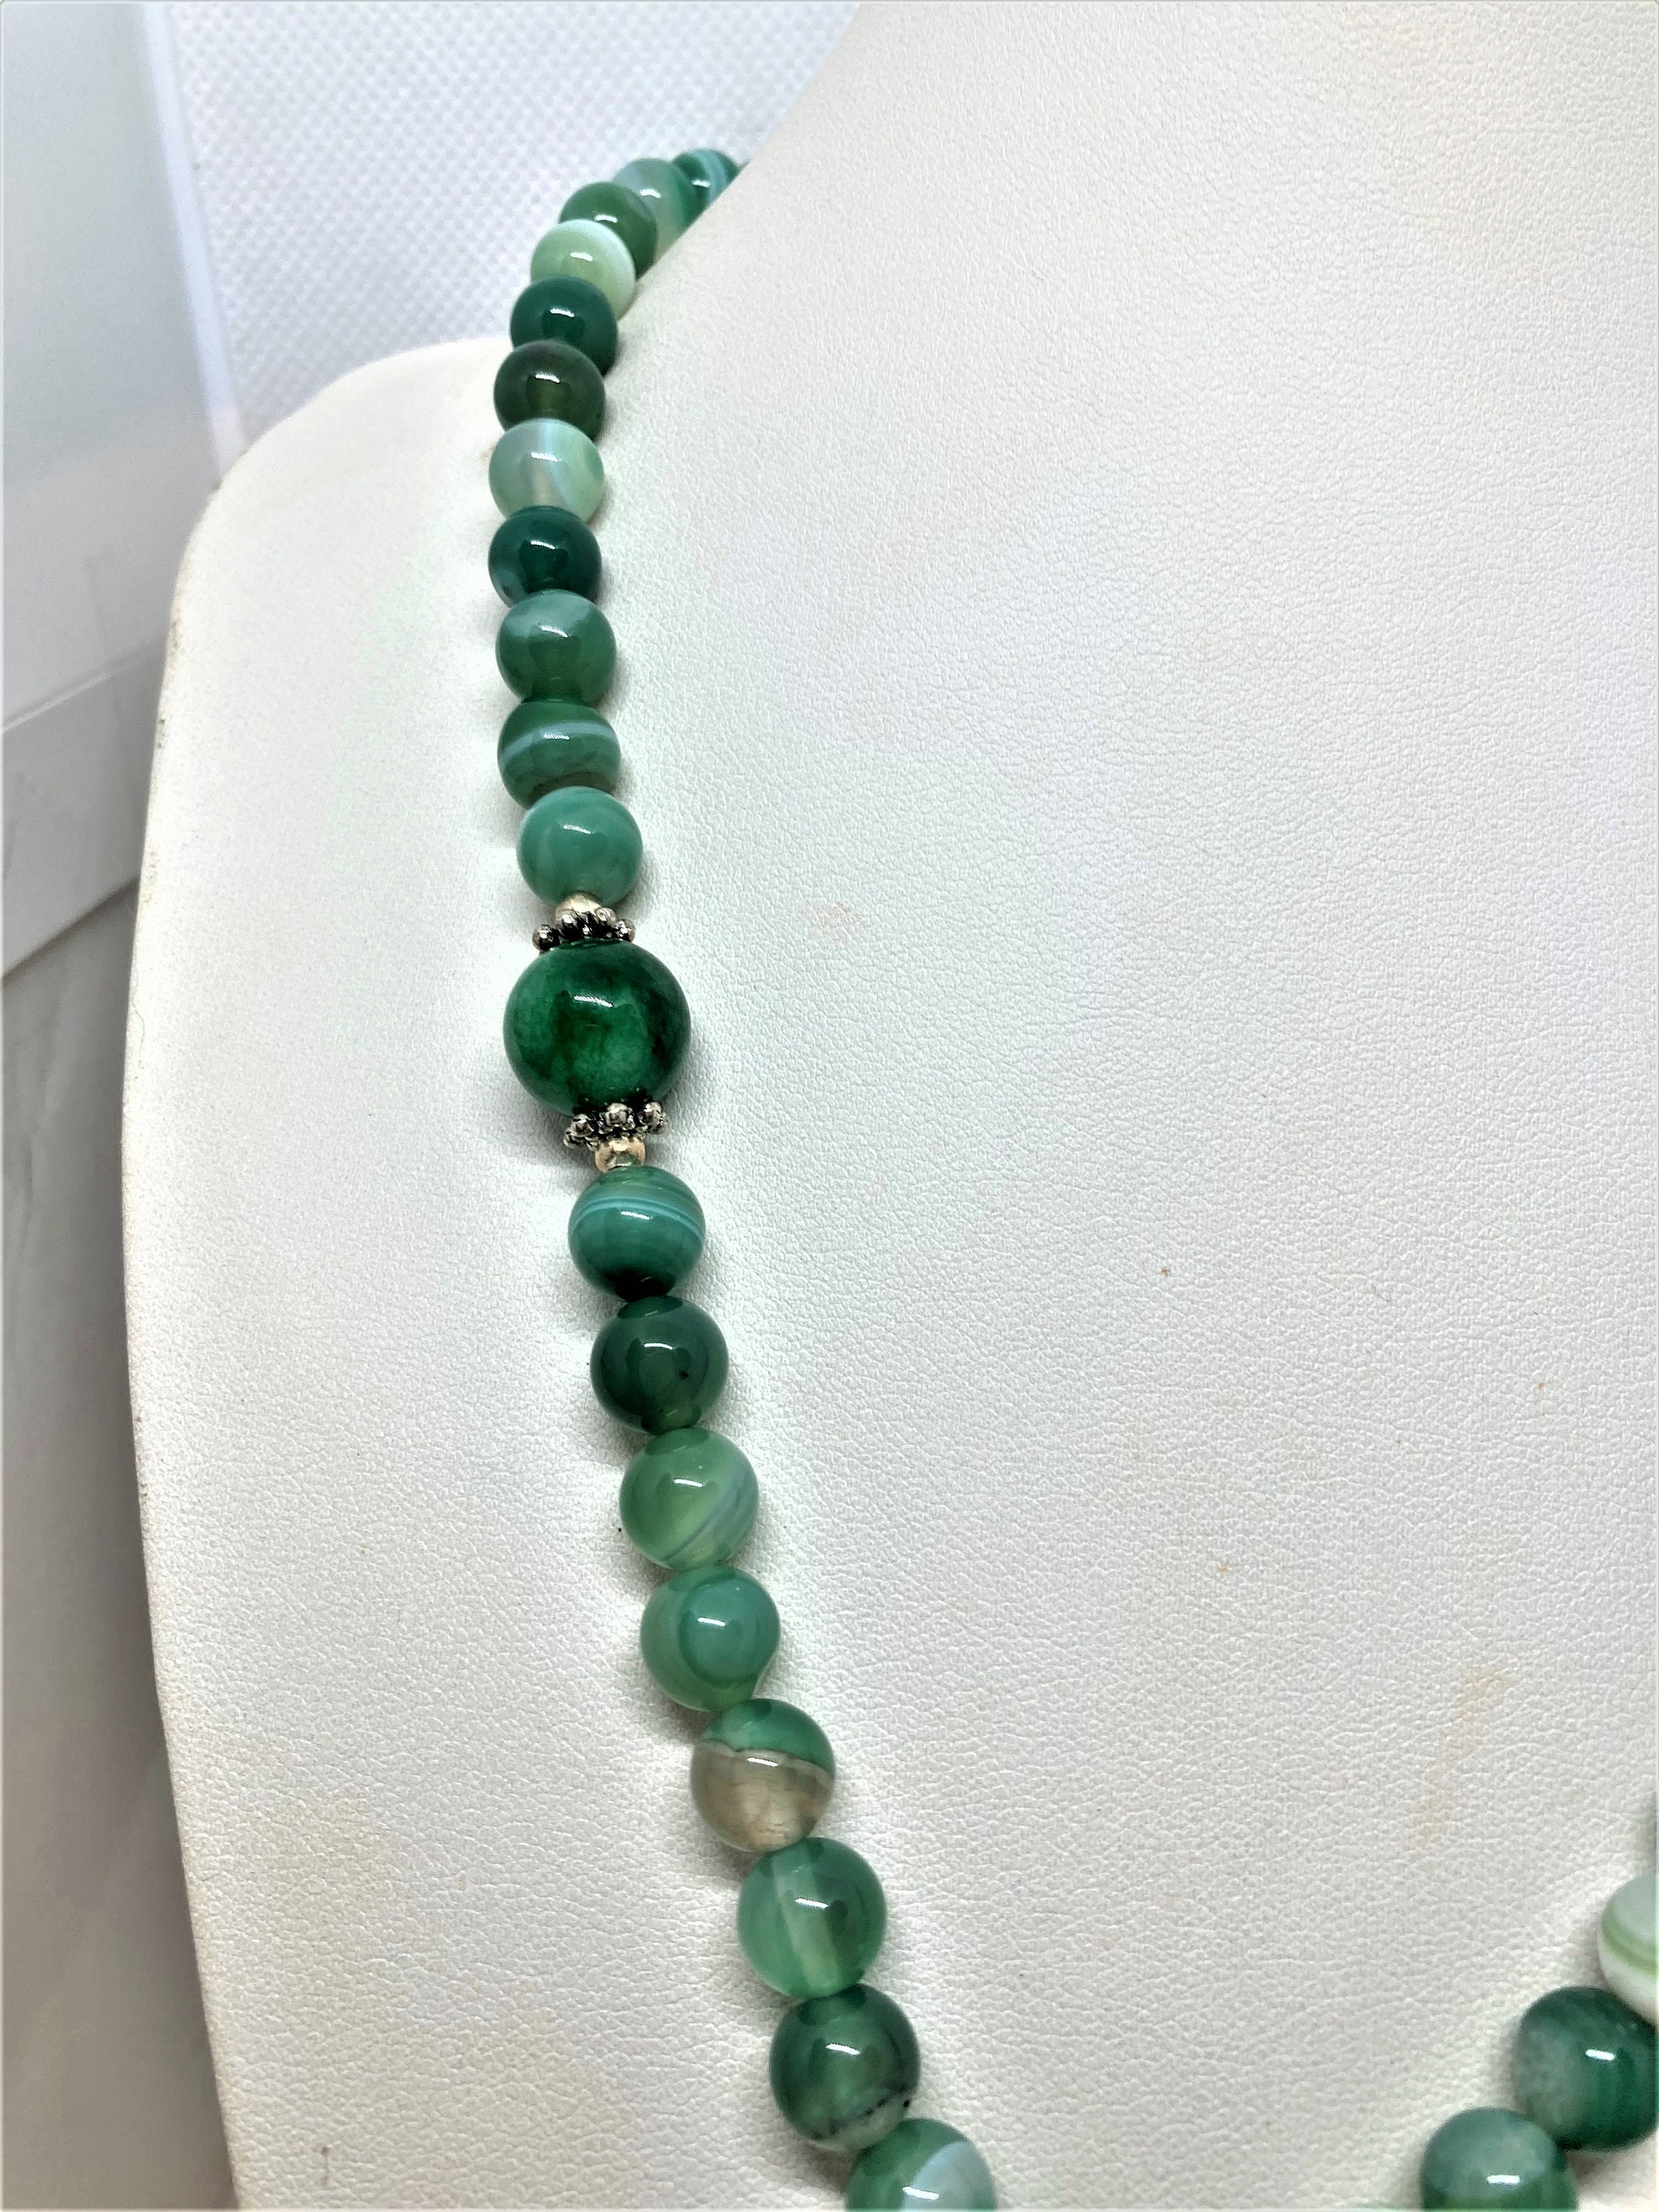 7mm Moss Agate Necklace, Moss Agate Pendant, Faceted Moss Agate, Unique  Gemstone Jewelry, Nature Inspired, Round, Green Agate Necklace